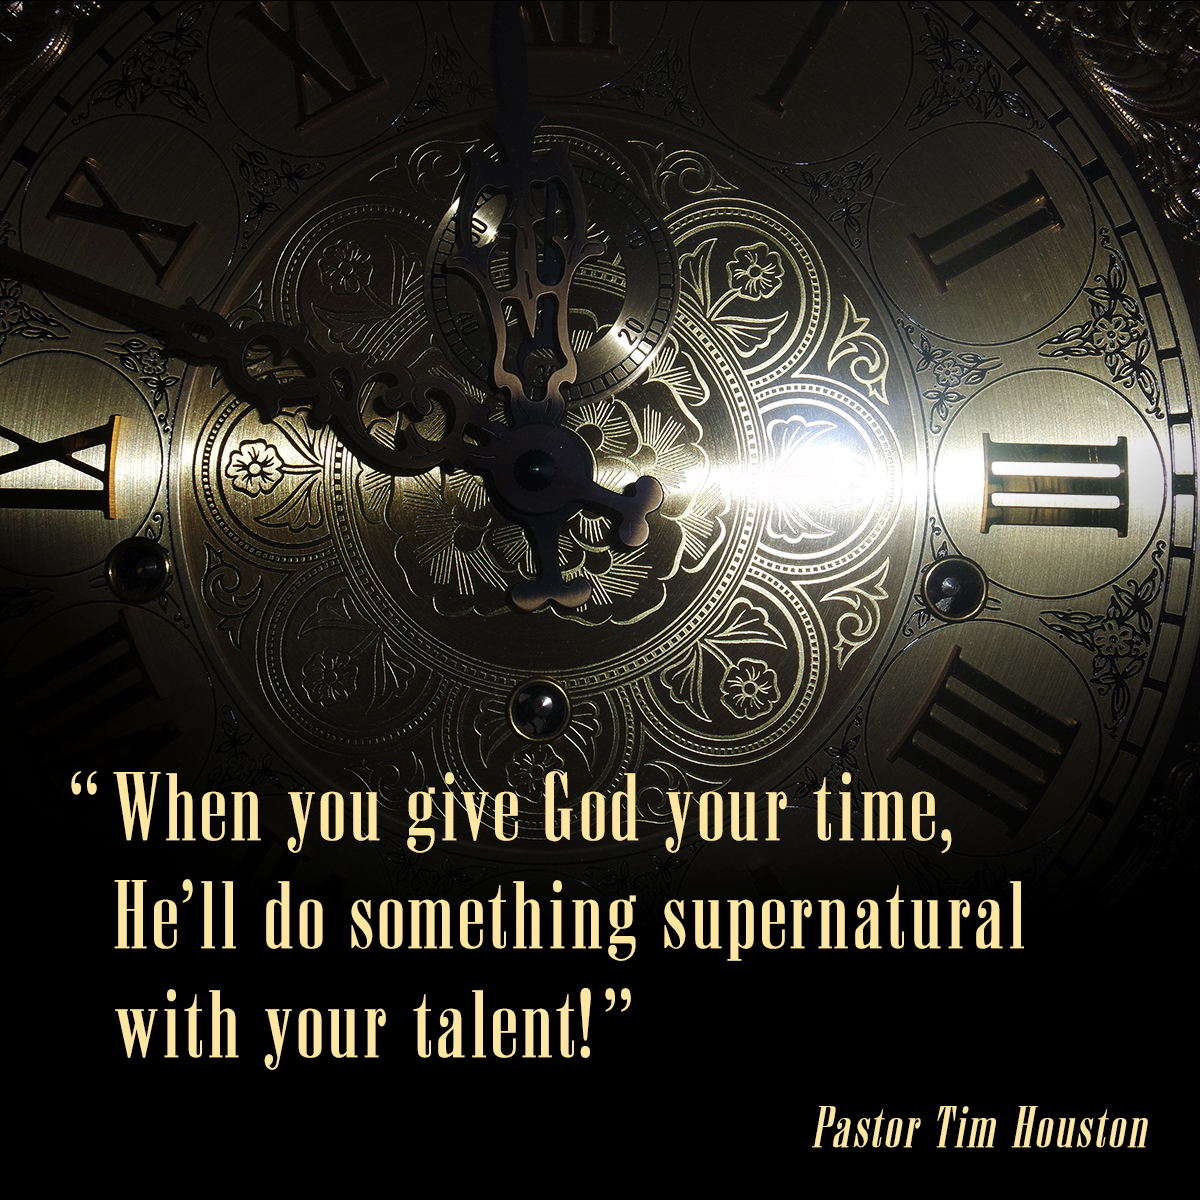 “When you give God your time, He’ll do something supernatural with your talent!” – Pastor Tim Houston